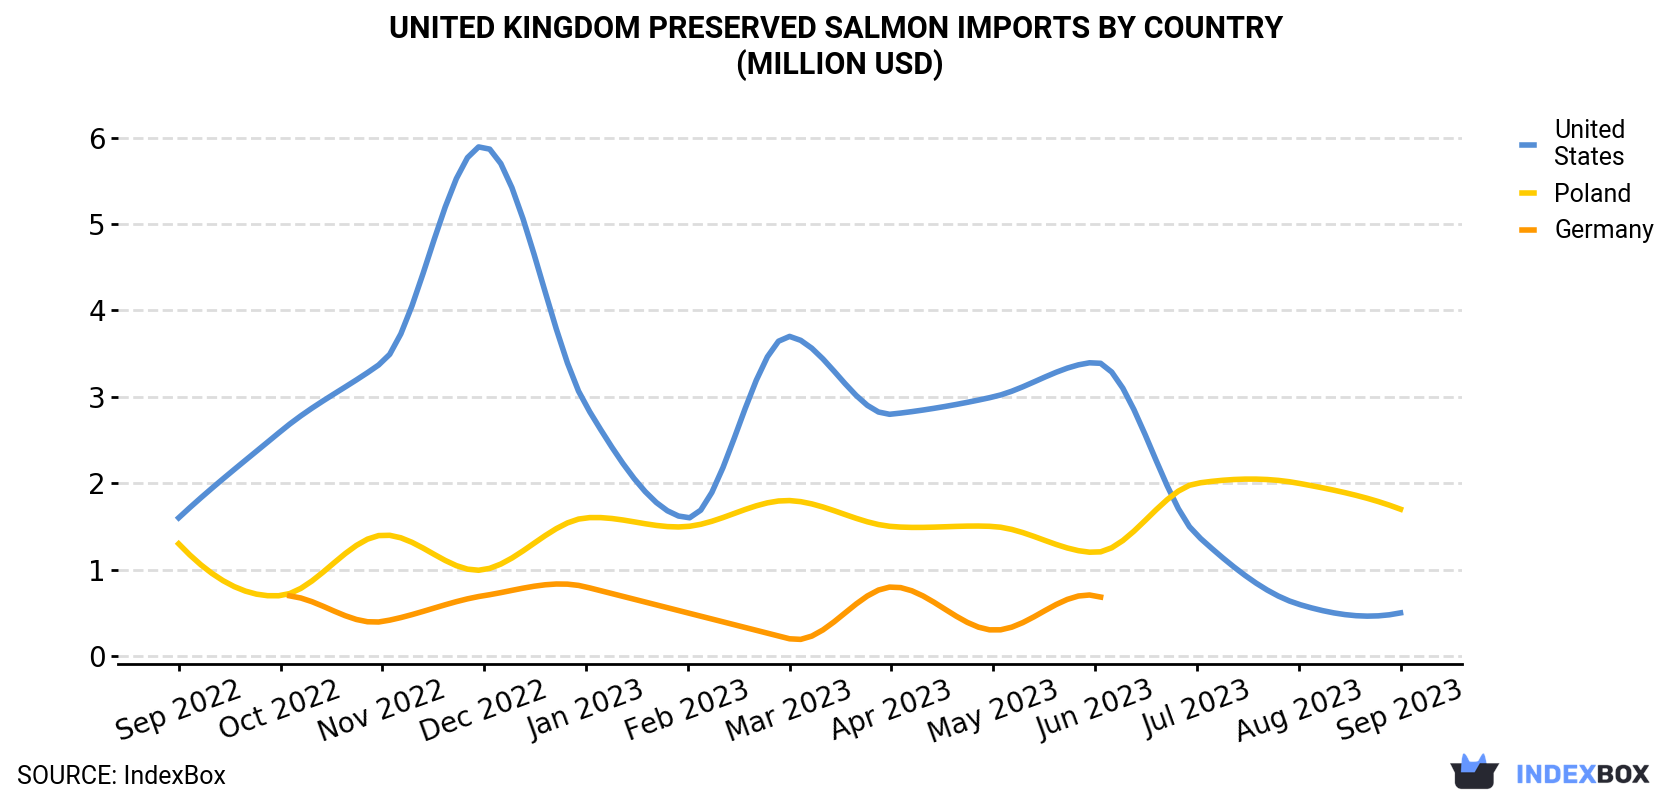 United Kingdom Preserved Salmon Imports By Country (Million USD)